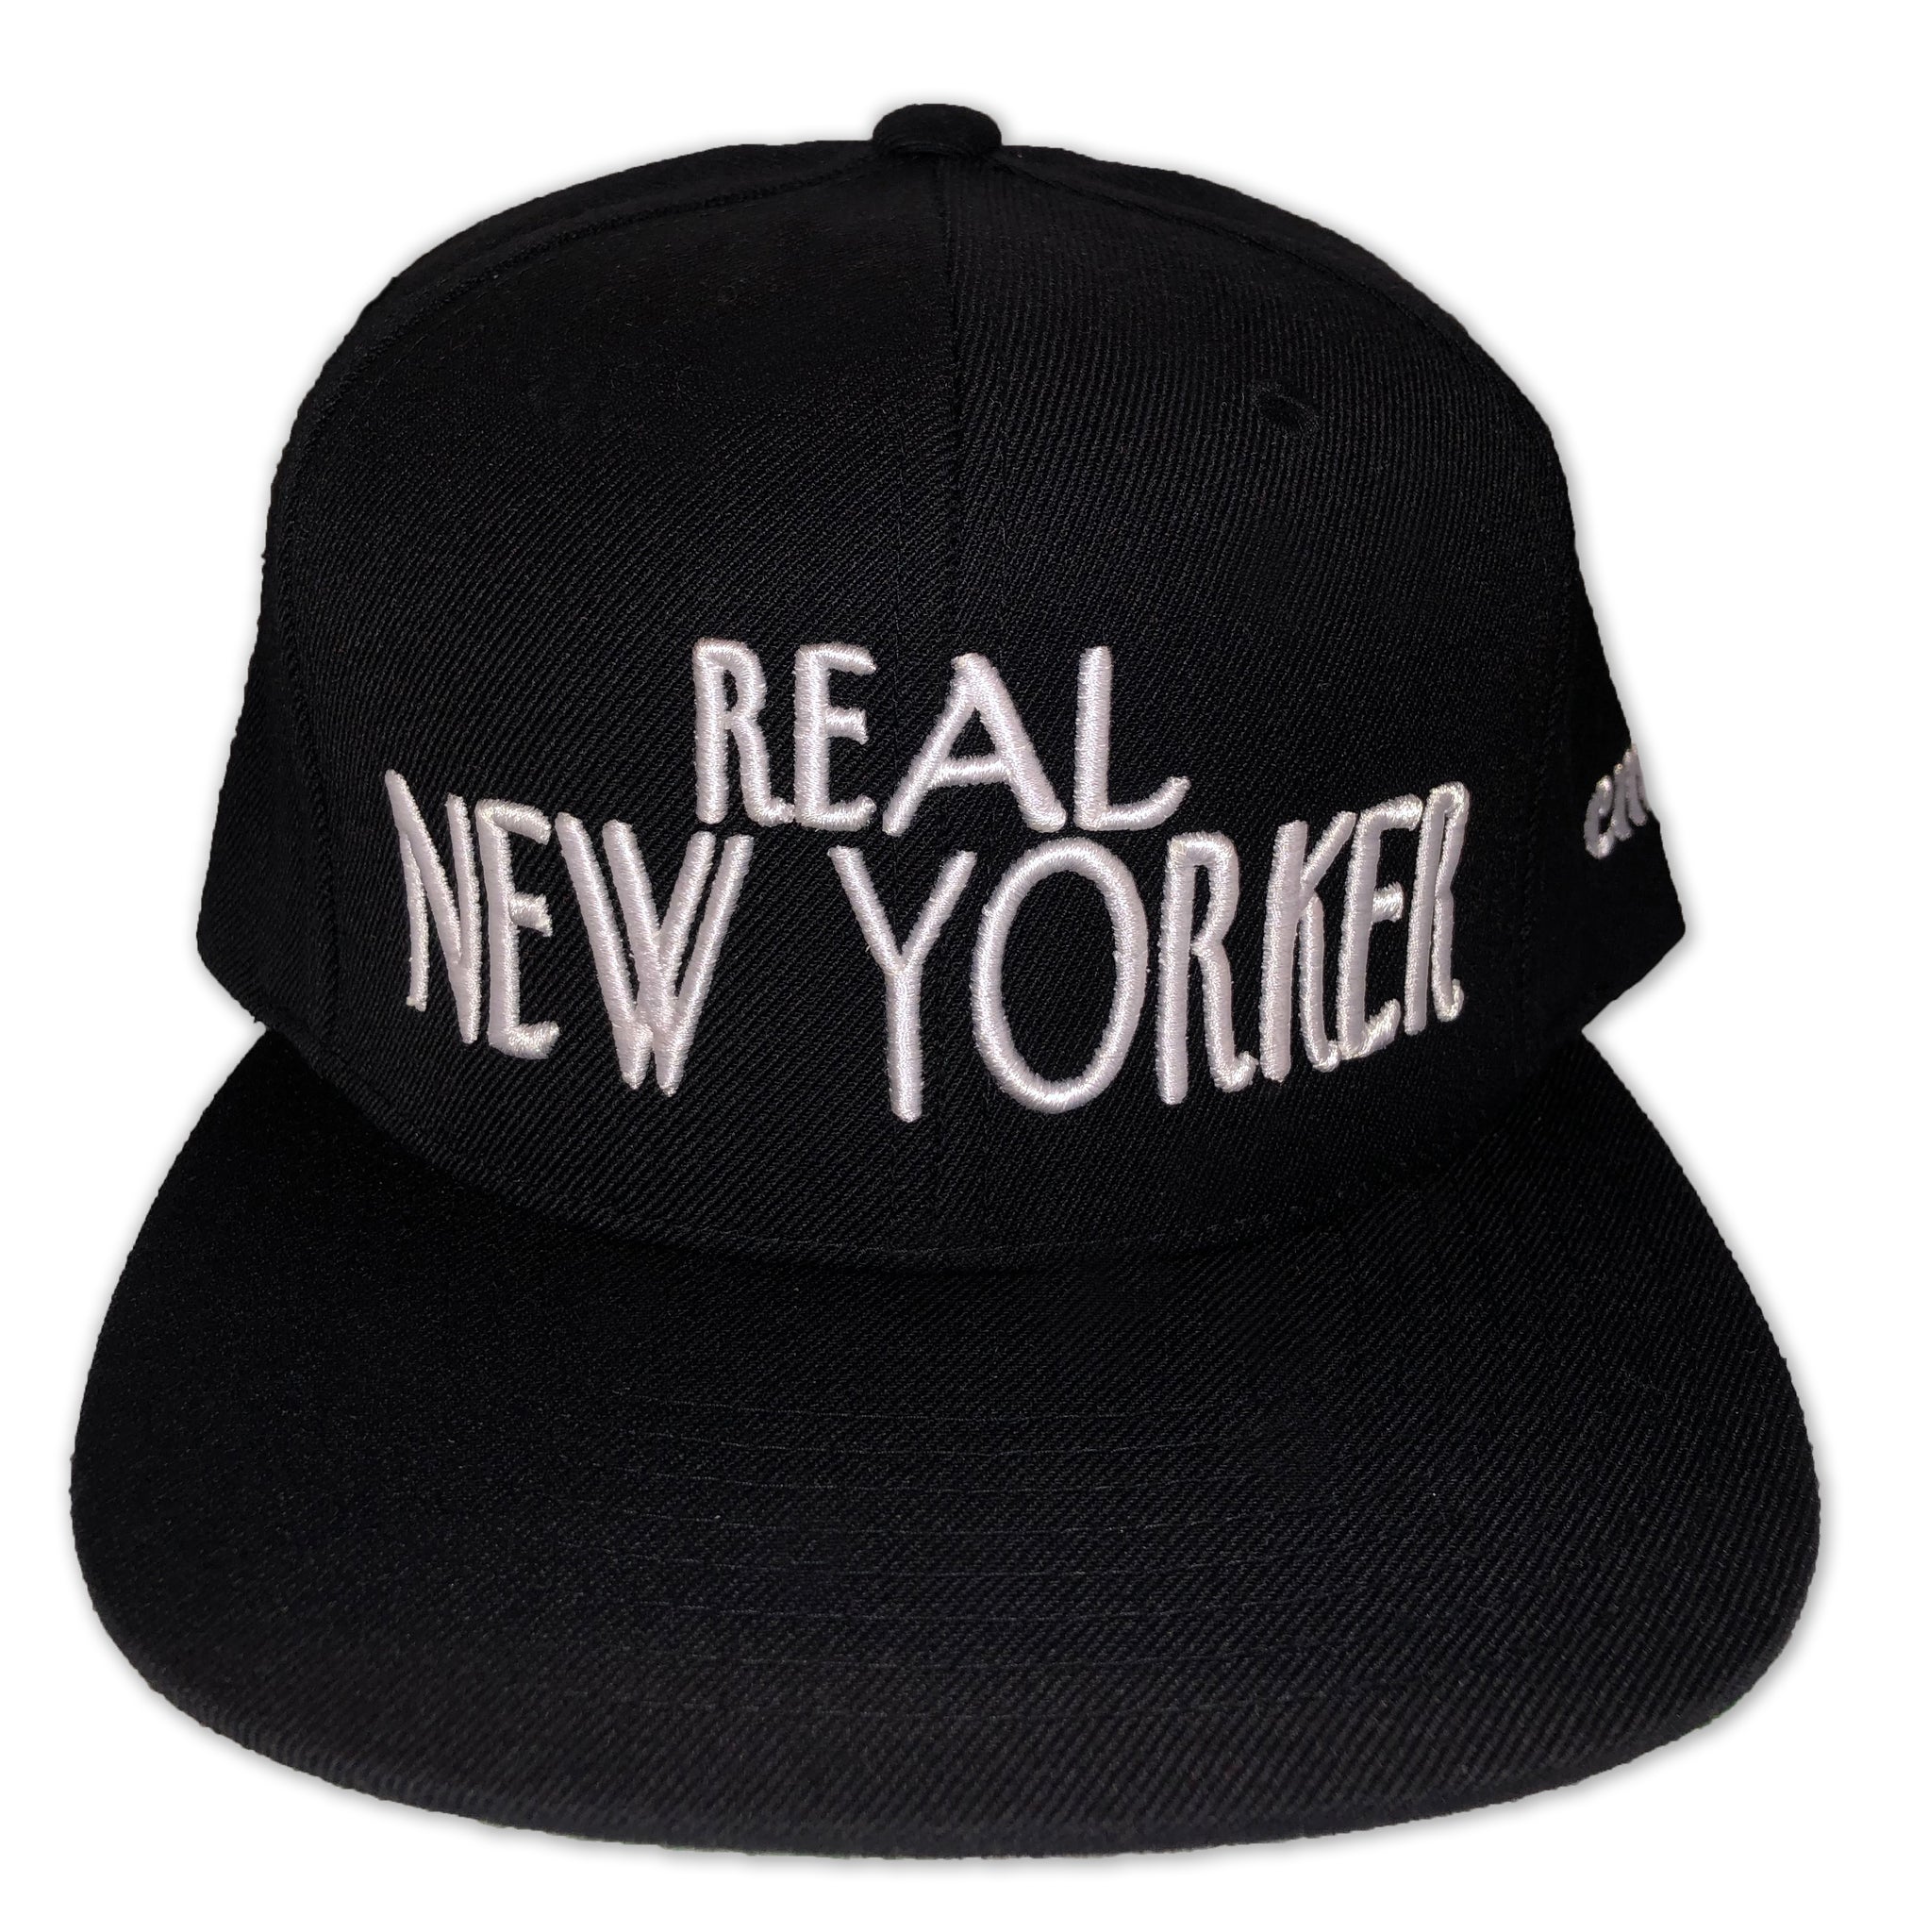 Real New Yorker – Classic Material NY